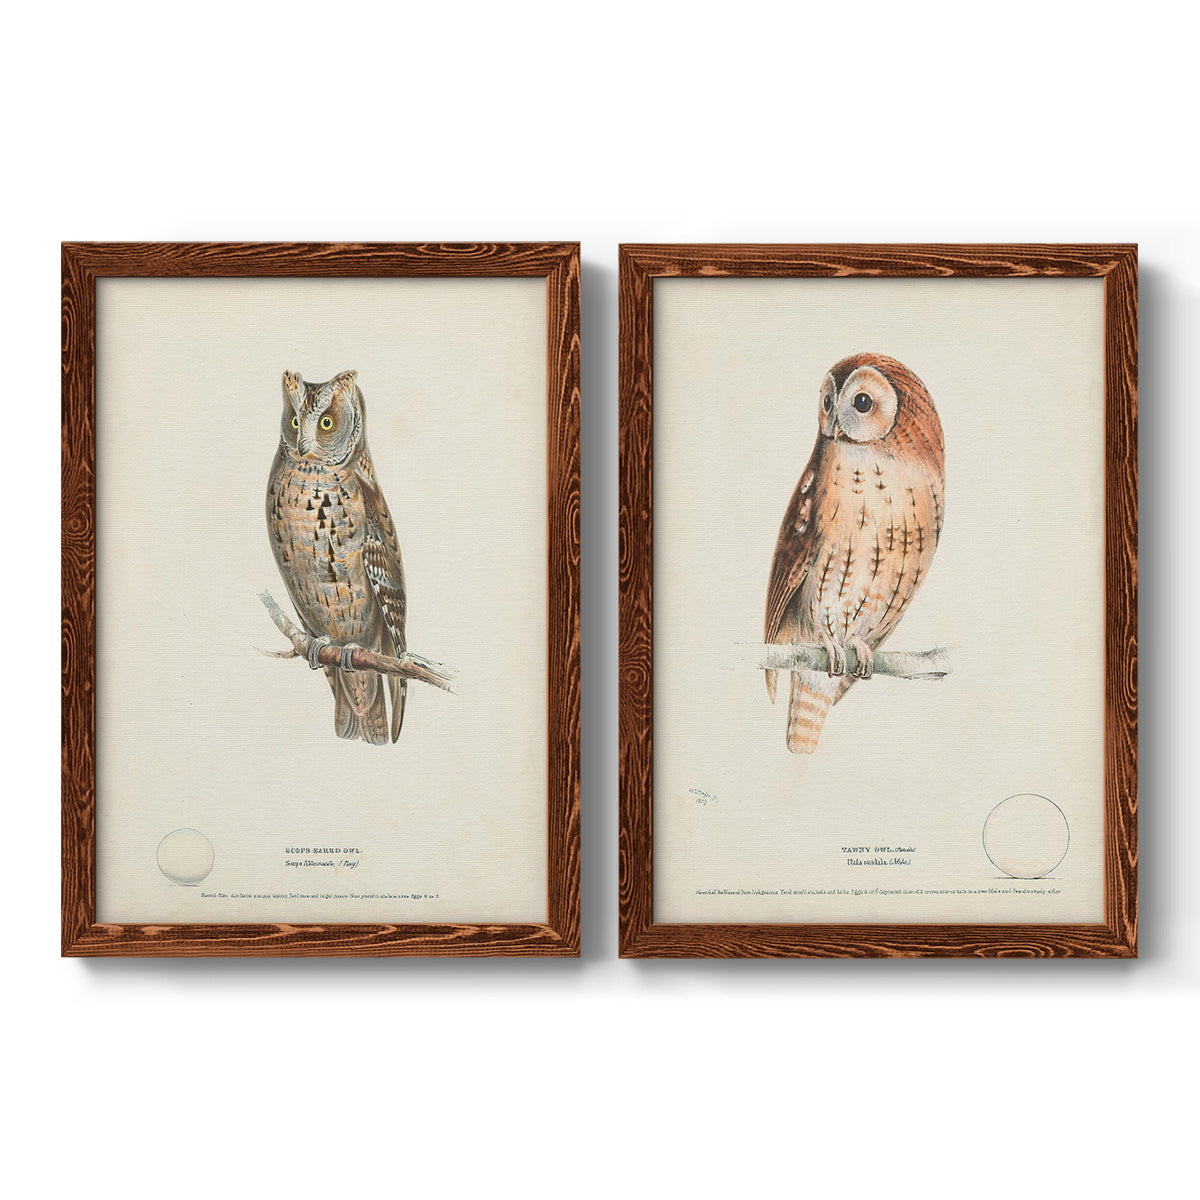 Scops- Eared Owl - Premium Framed Canvas 2 Piece Set - Ready to Hang